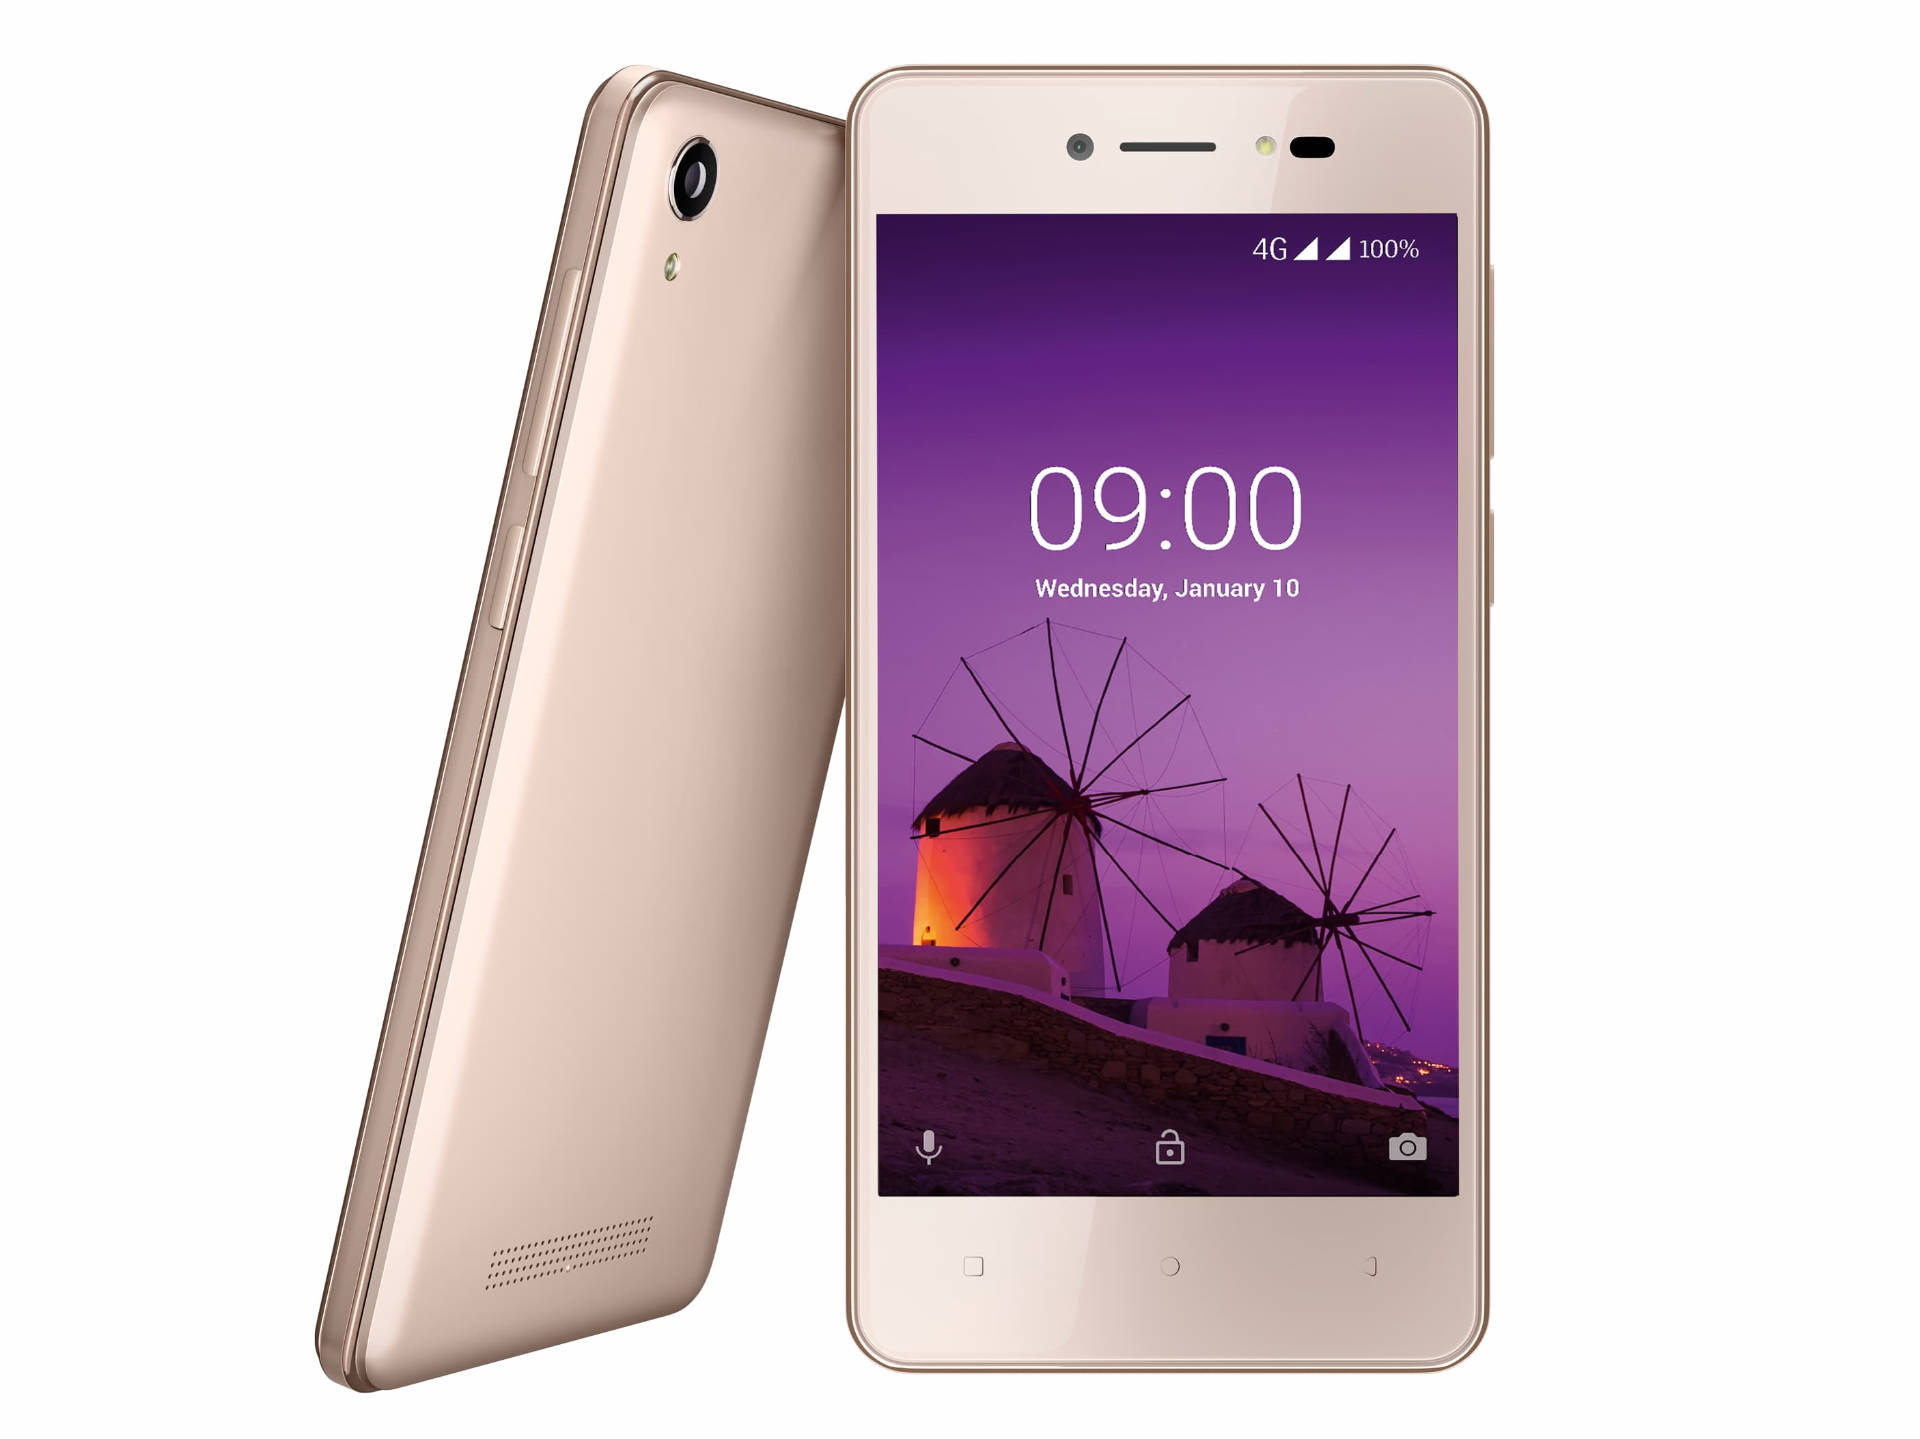 LAVA Z50 with Android Oreo (Go edition)